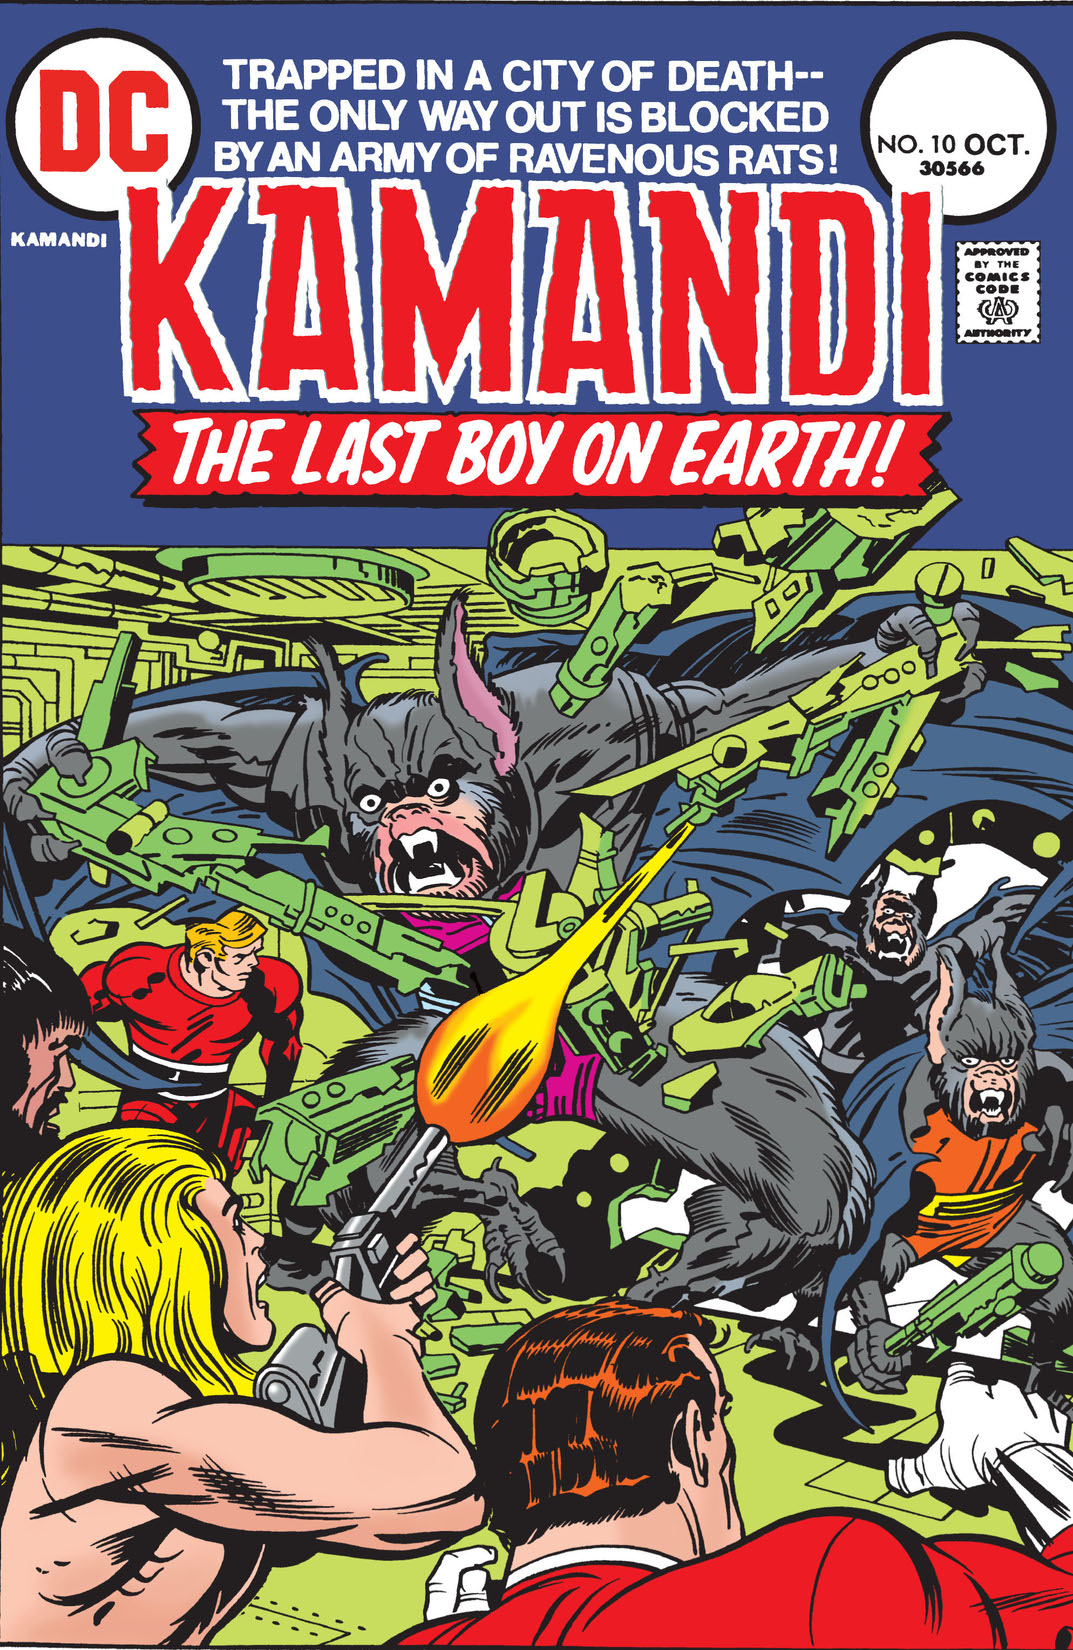 Kamandi: The Last Boy on Earth #10 preview images